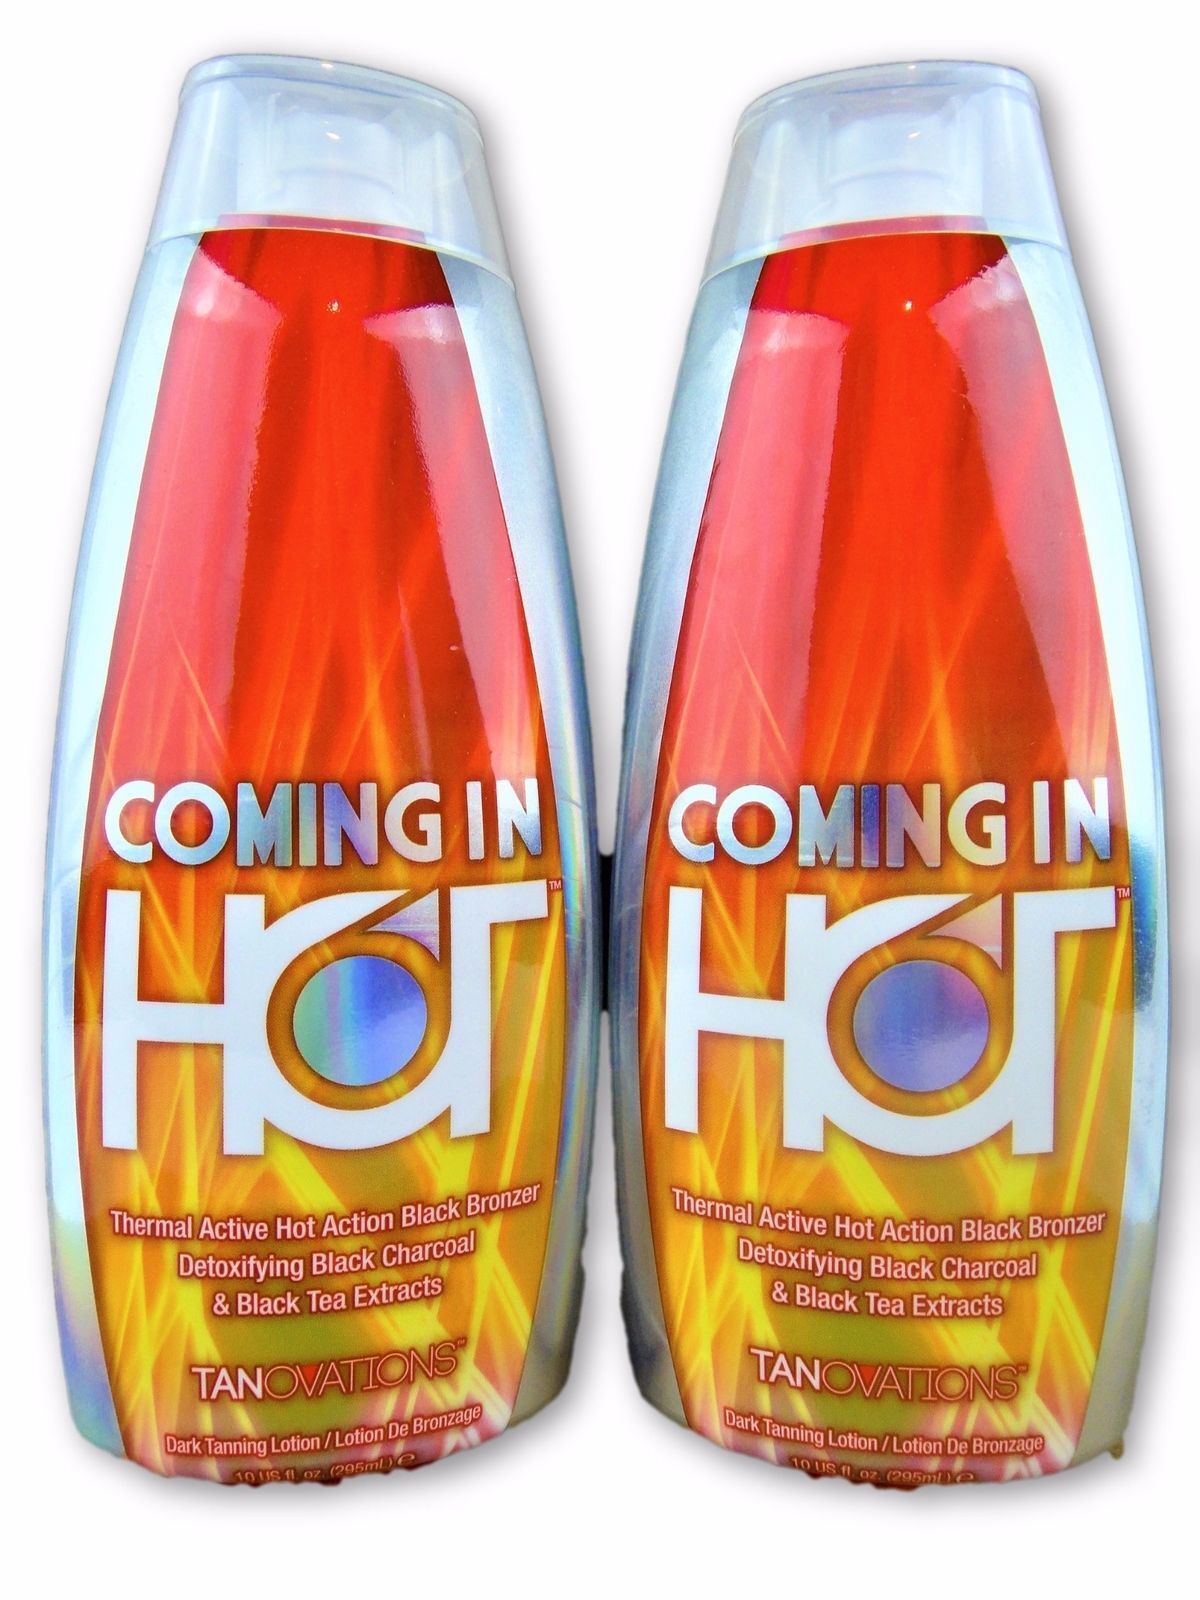 2 Tanovations Ed Hardy Coming In Hot Tingle Tanning Bed Lotion 10 oz Bottles Ed Hardy Coming In Hot